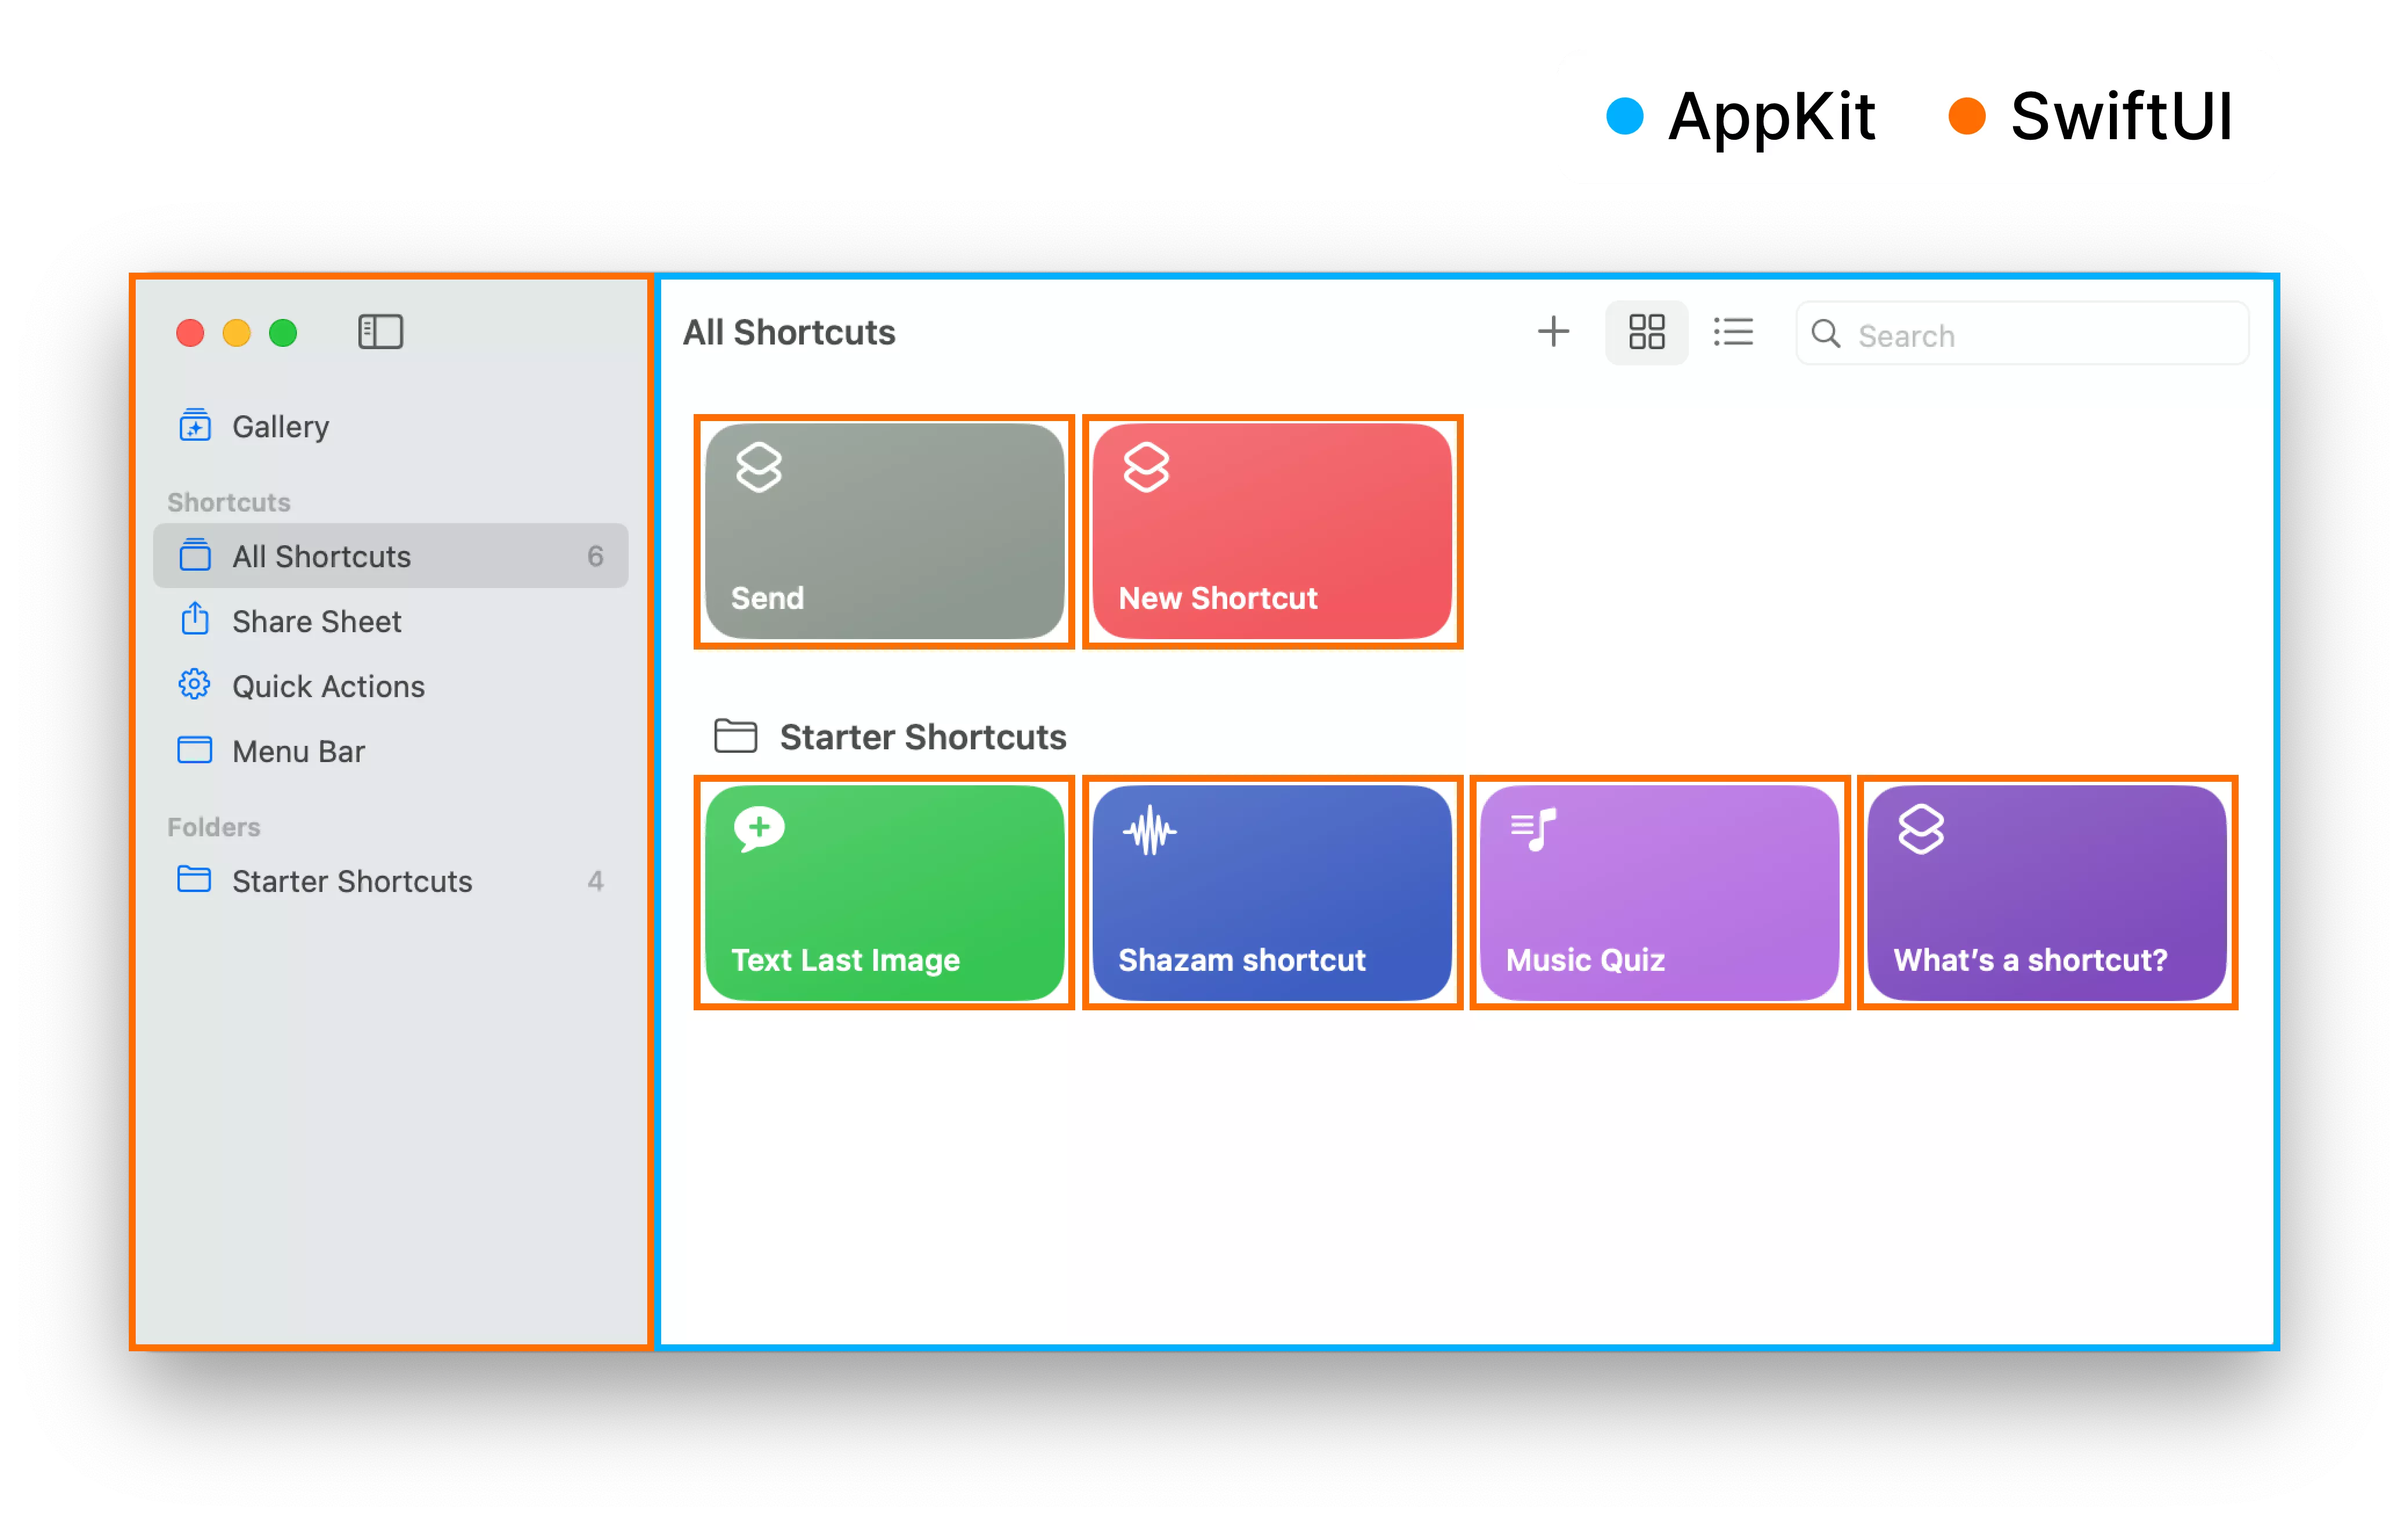 A diagram of the Shortcuts app that shows which parts are written in AppKit or SwiftUI